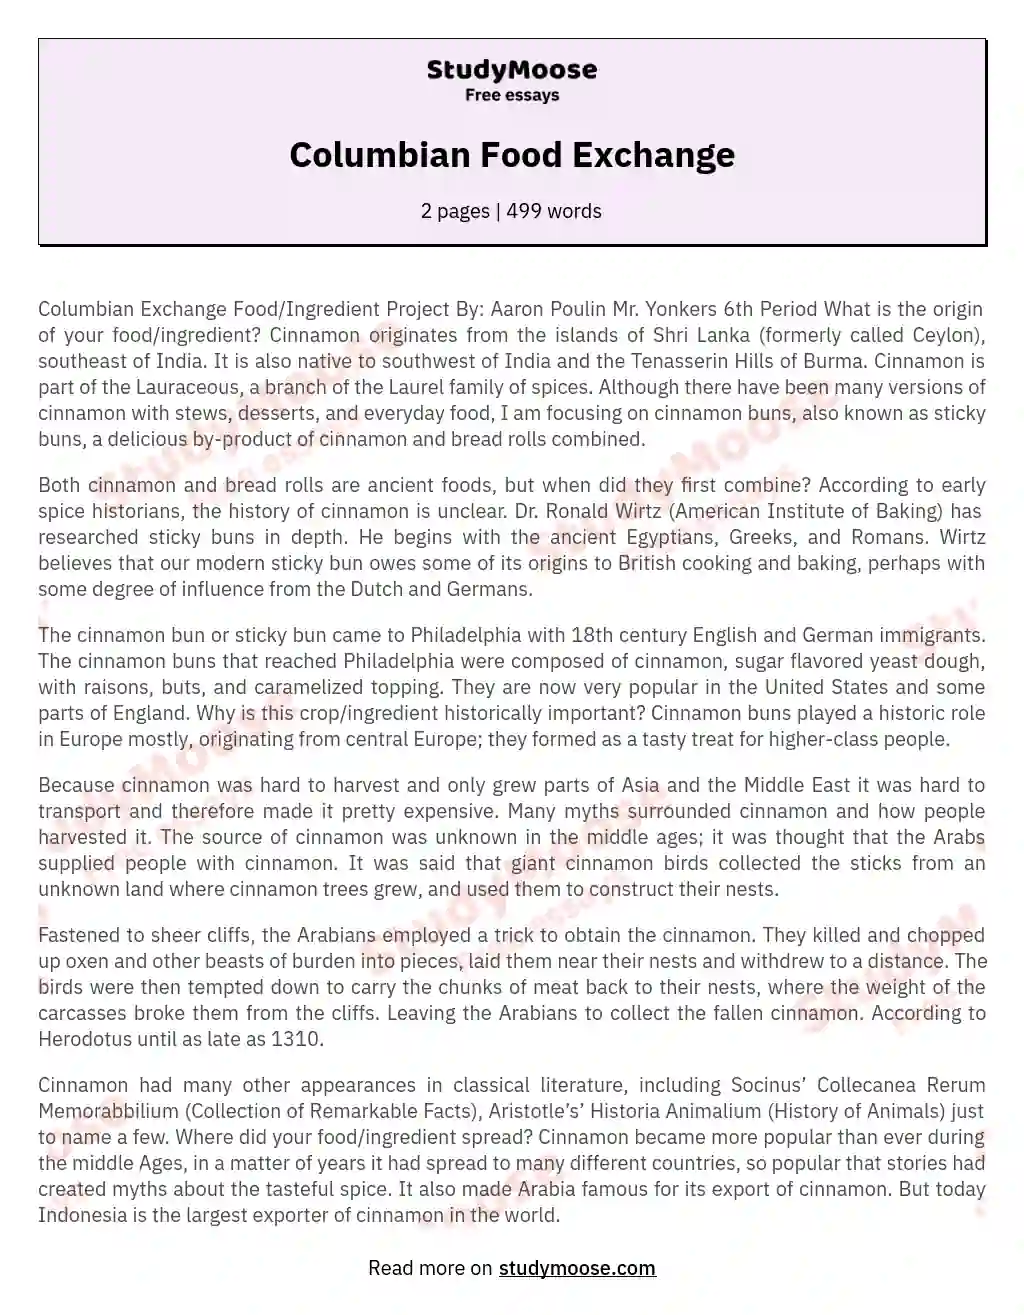 how to start an essay about the columbian exchange